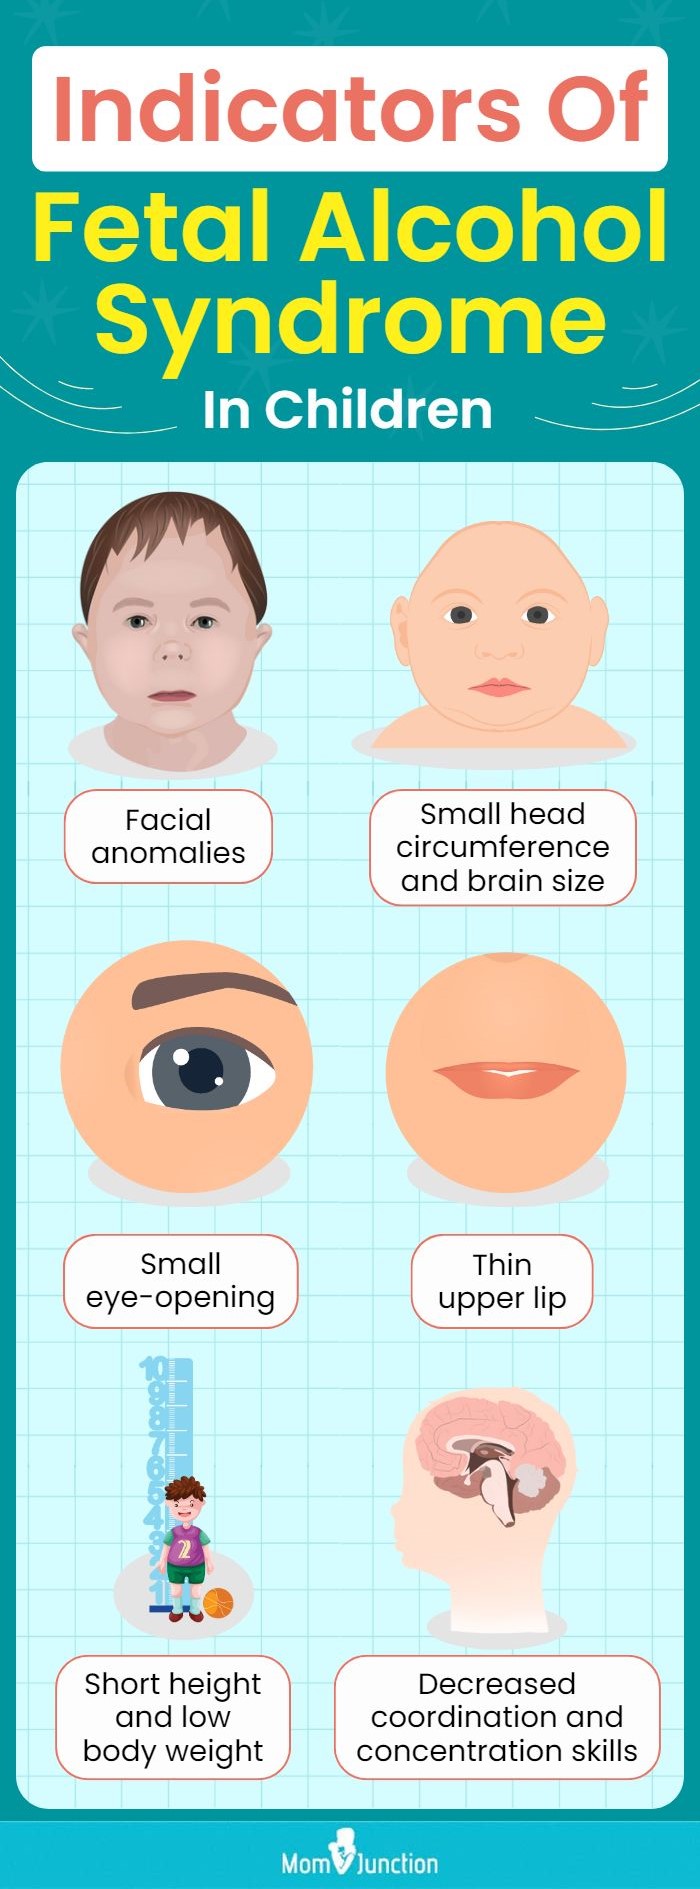 indicators of fetal alcohol syndrome in children (infographic)